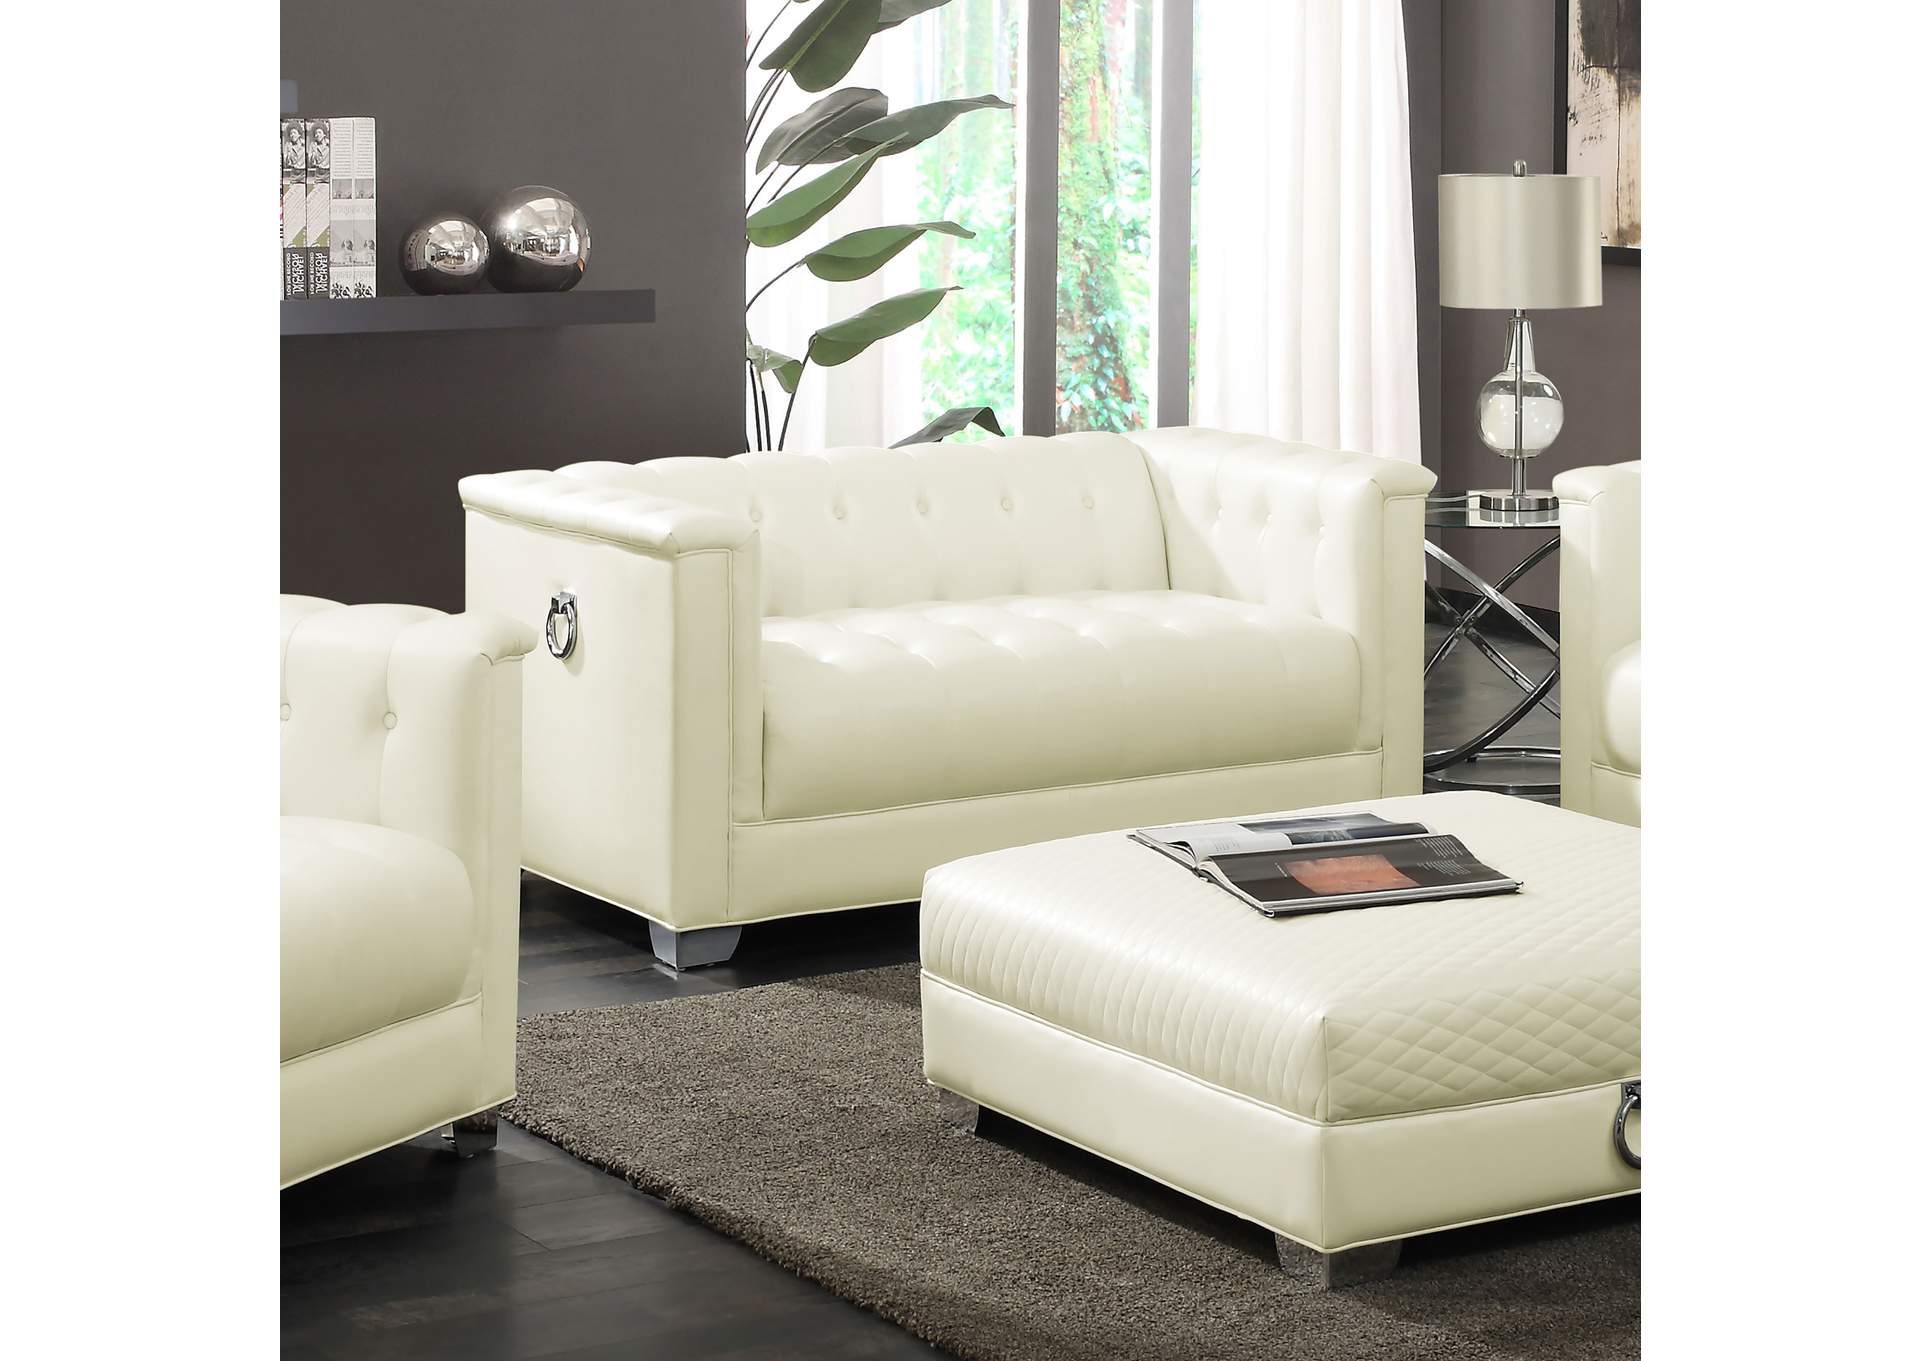 Chaviano Tufted Upholstered Loveseat Pearl White,Coaster Furniture